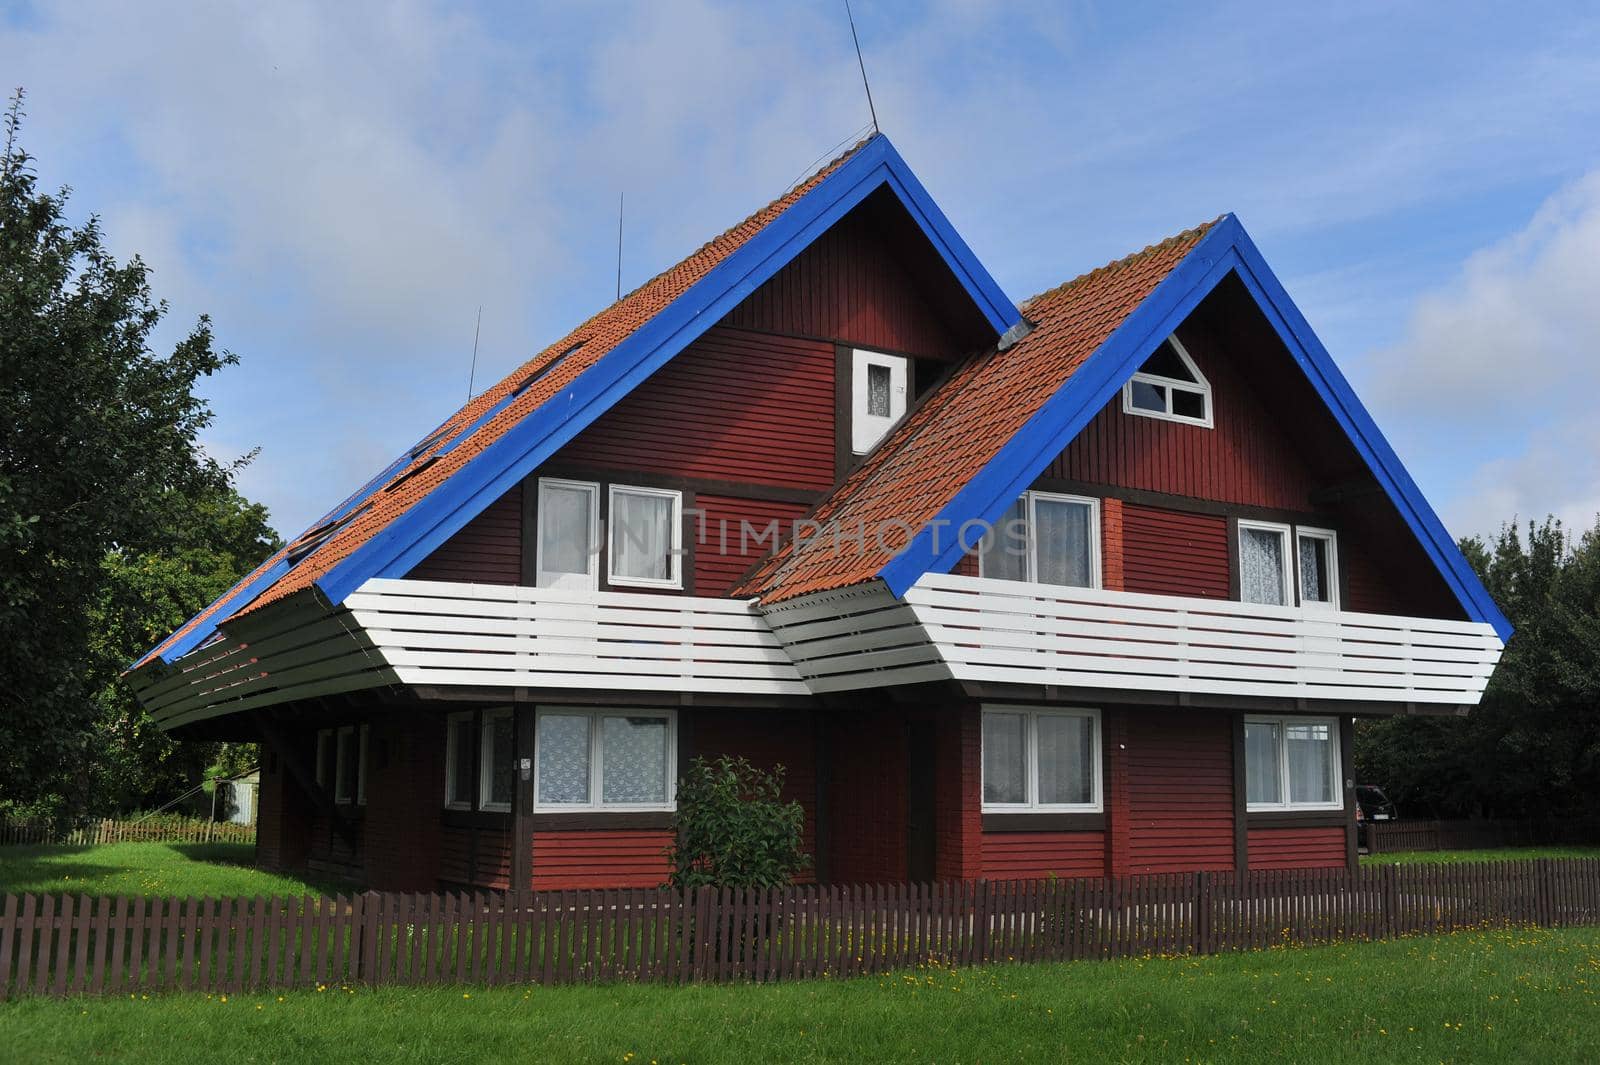 Nida Lithuania Beautiful old Lithuanian traditional wooden house in Nida, Lithuania, Europe by Lobachad